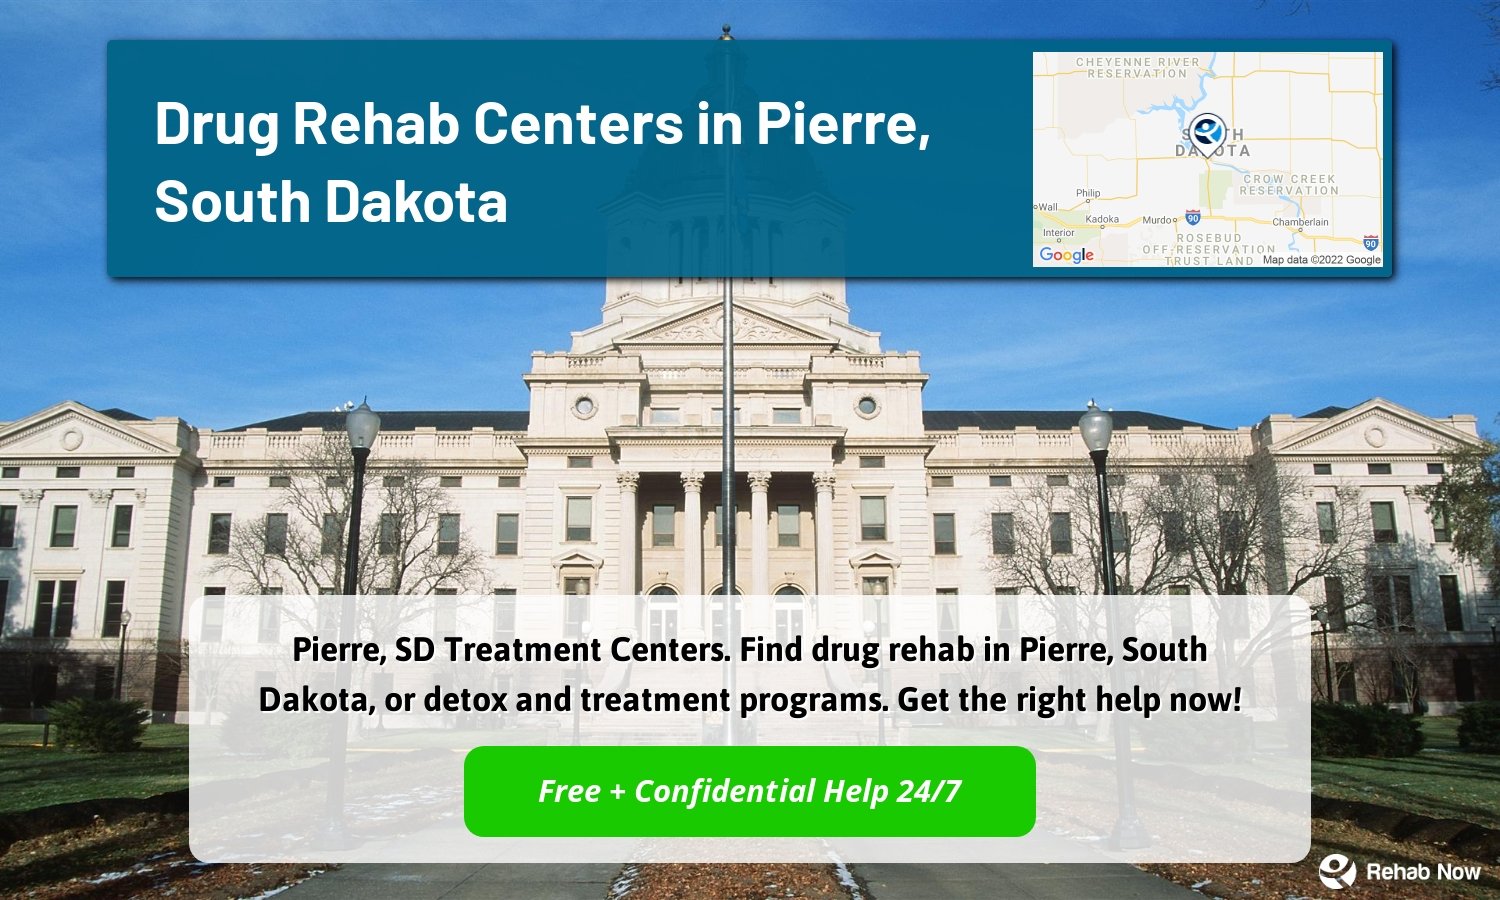 Pierre, SD Treatment Centers. Find drug rehab in Pierre, South Dakota, or detox and treatment programs. Get the right help now!